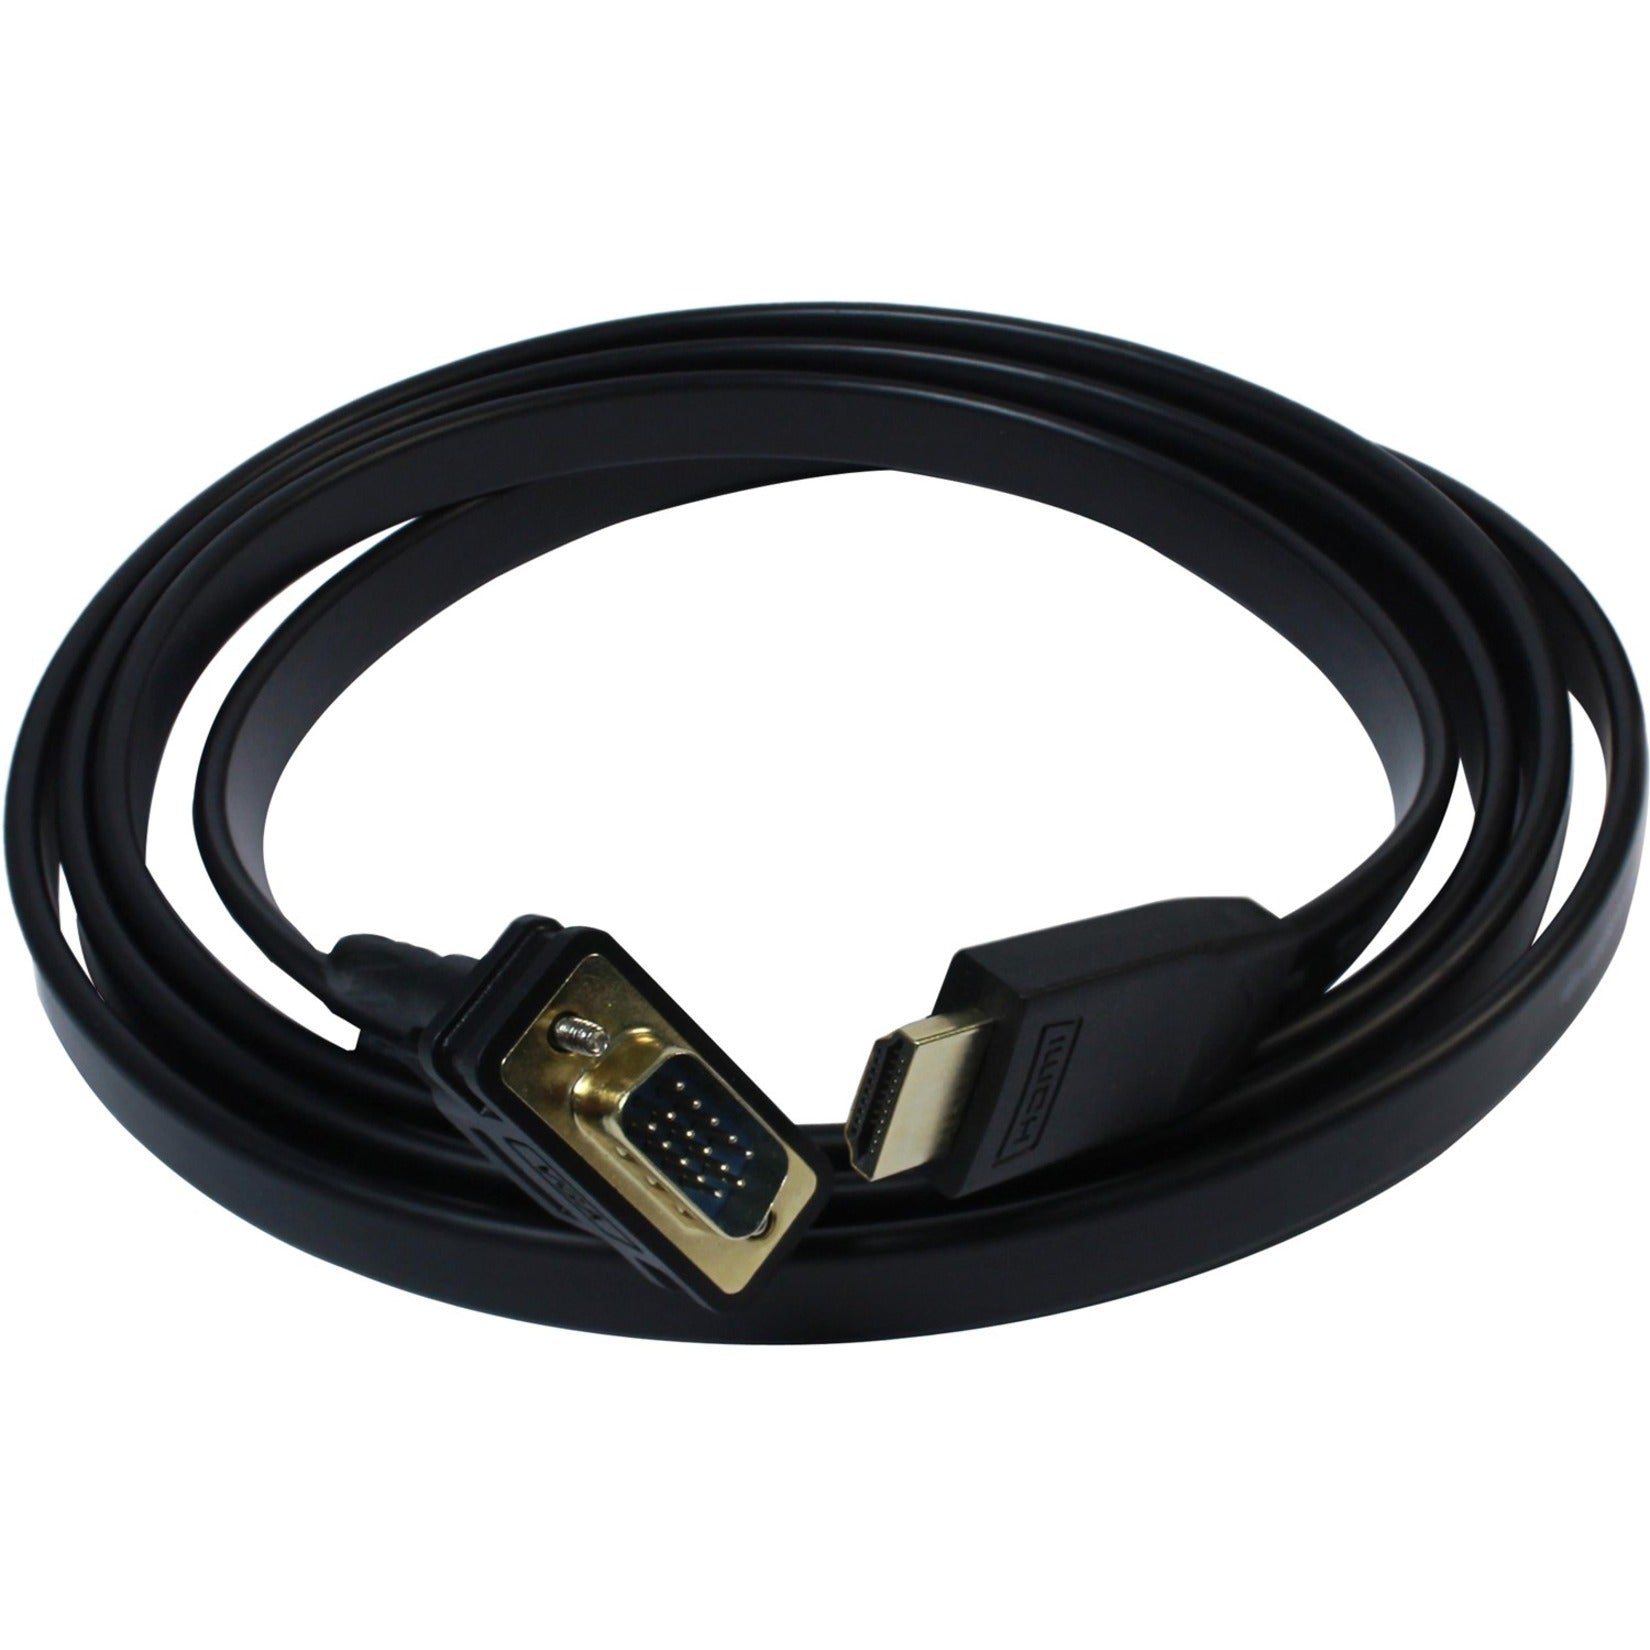 Plugable HDMI-VGA HDMI TO VGA Active Adapter Cable, 6 ft, 1920 x 1080 Supported Resolution